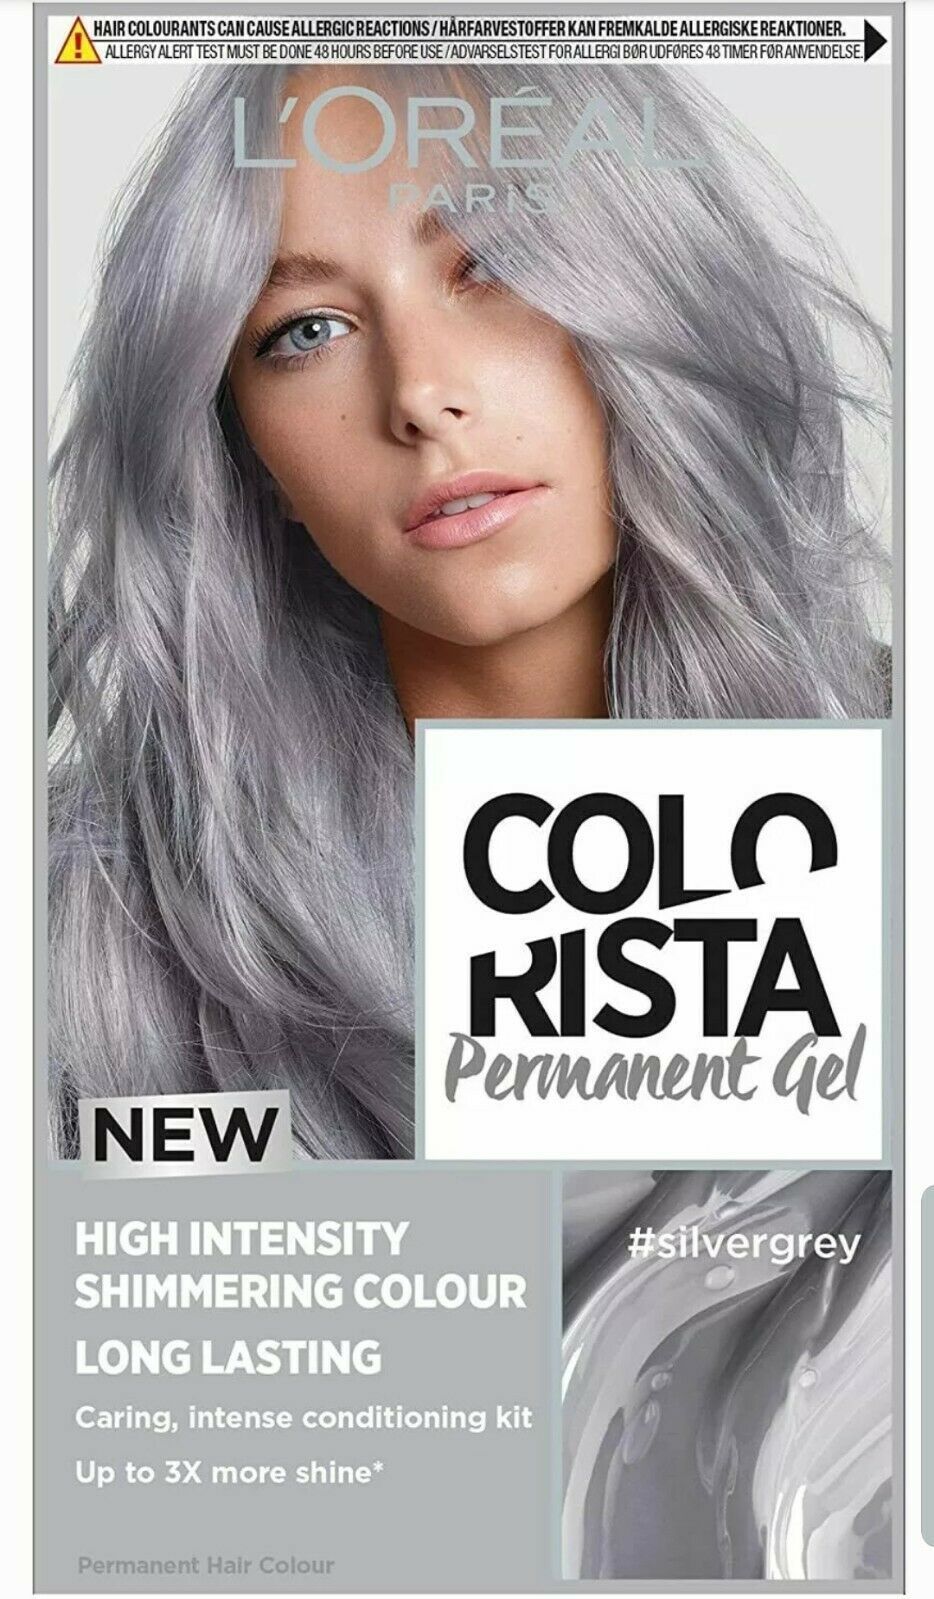 LOreal Colorista COOL SHADE SILVER GREY Permanent Hair Dye Gel SHIMMERING COLOUR